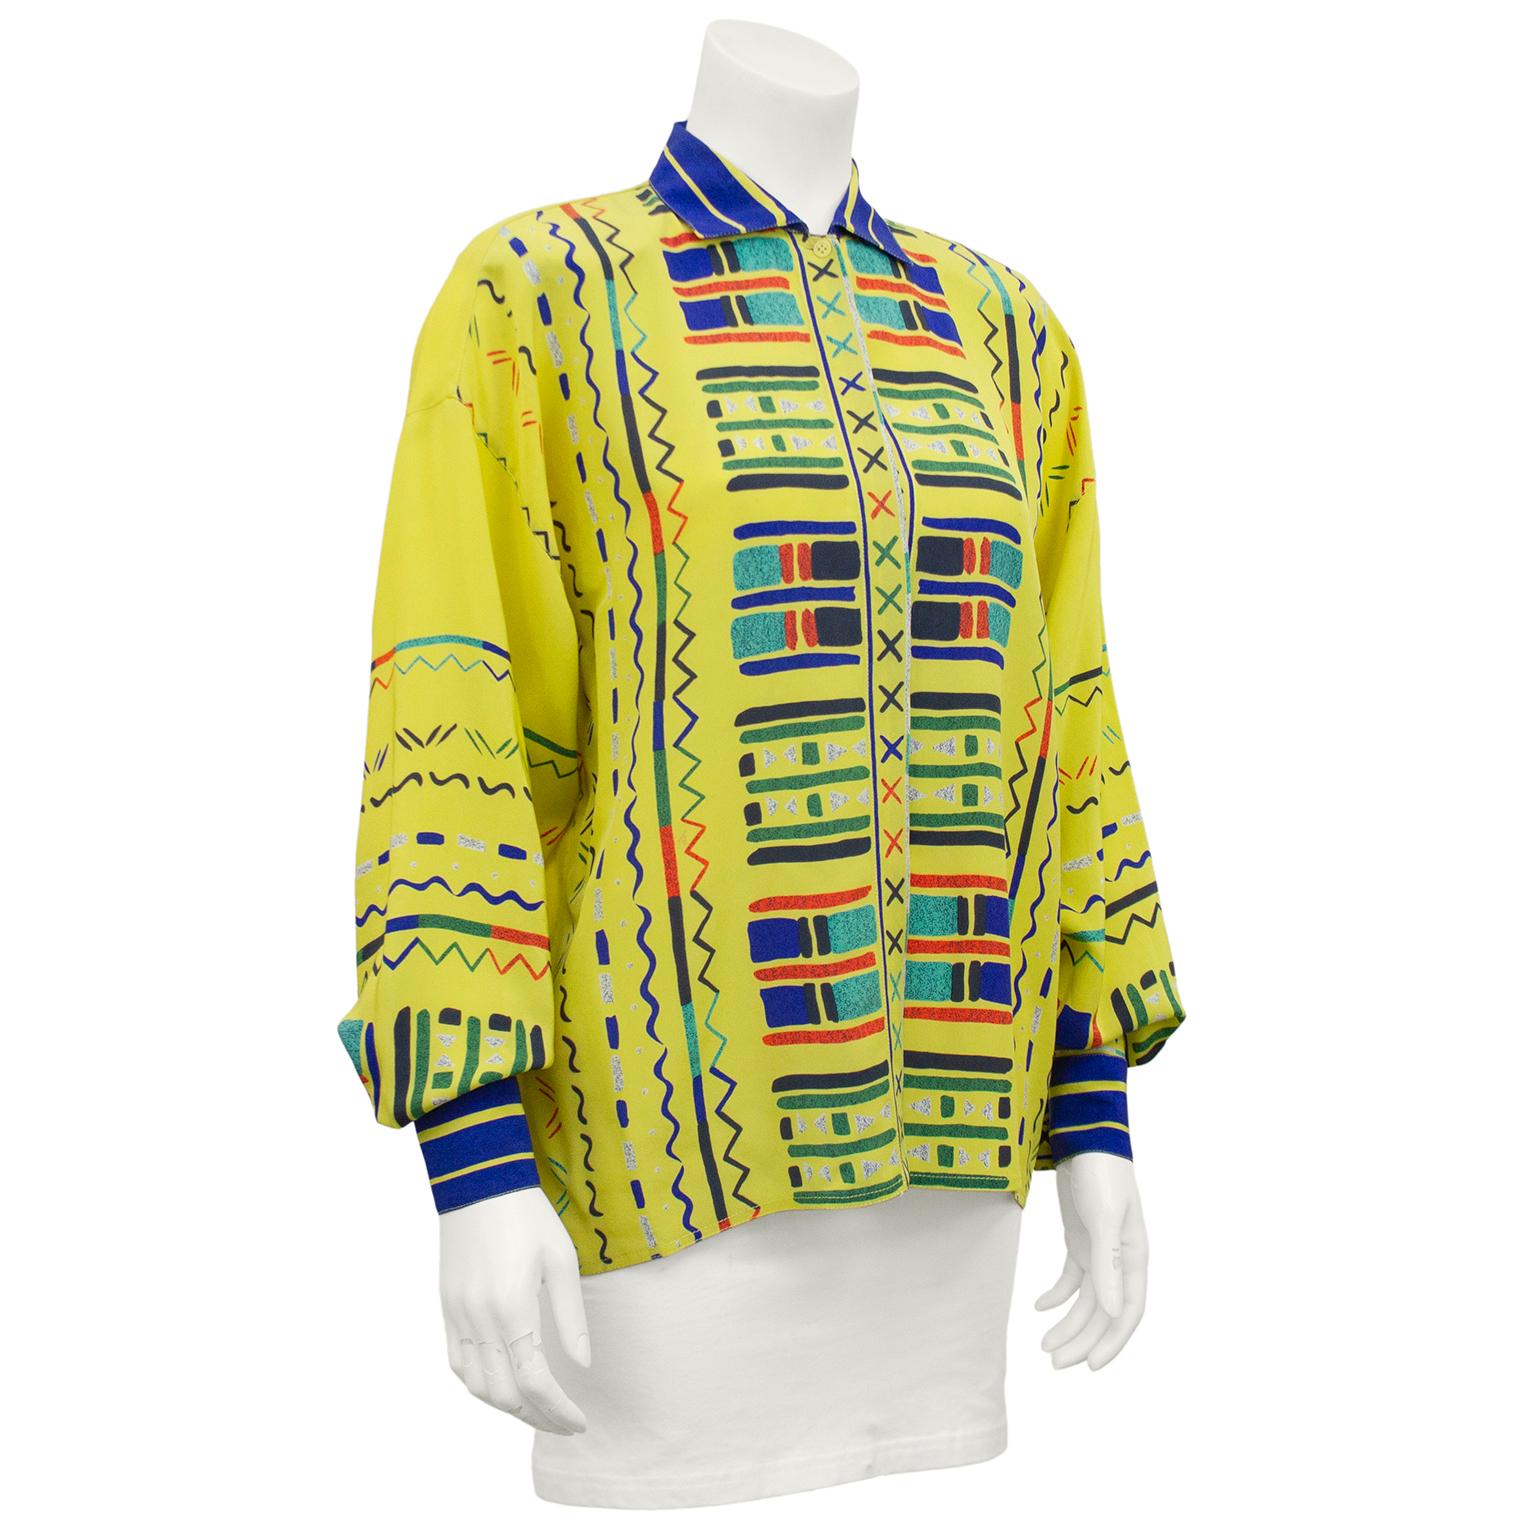 Gianni Versace silk blouse from the early 1990s. Highlighter yellow silk with multi colored geometric print all over the front and sleeves. Royal blue and yellow striped collar and cuffs. Bishop sleeves. Some minor speckling throughout which may be